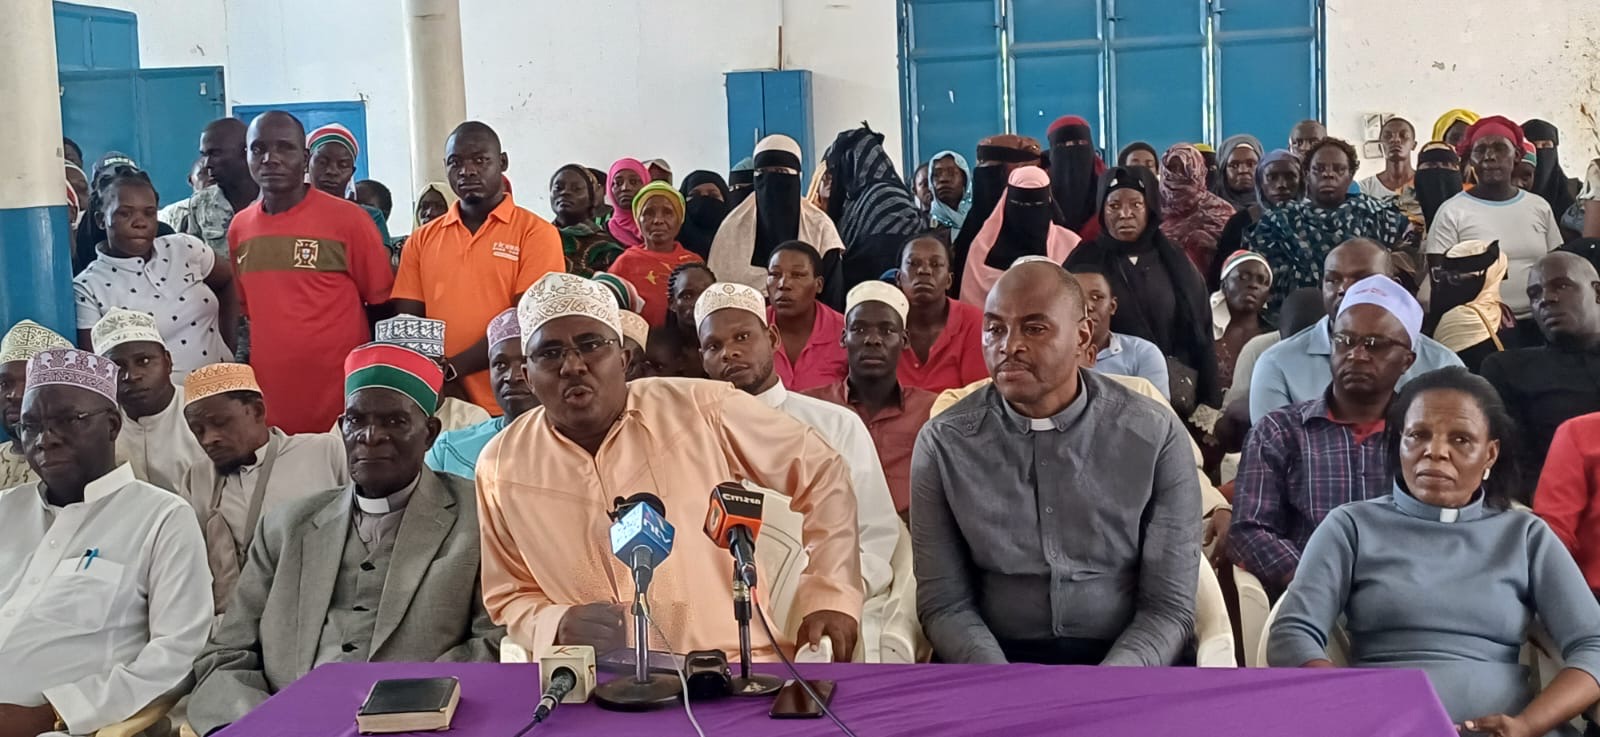 Mombasa religious leaders urge Gen-Z youth to halt protests